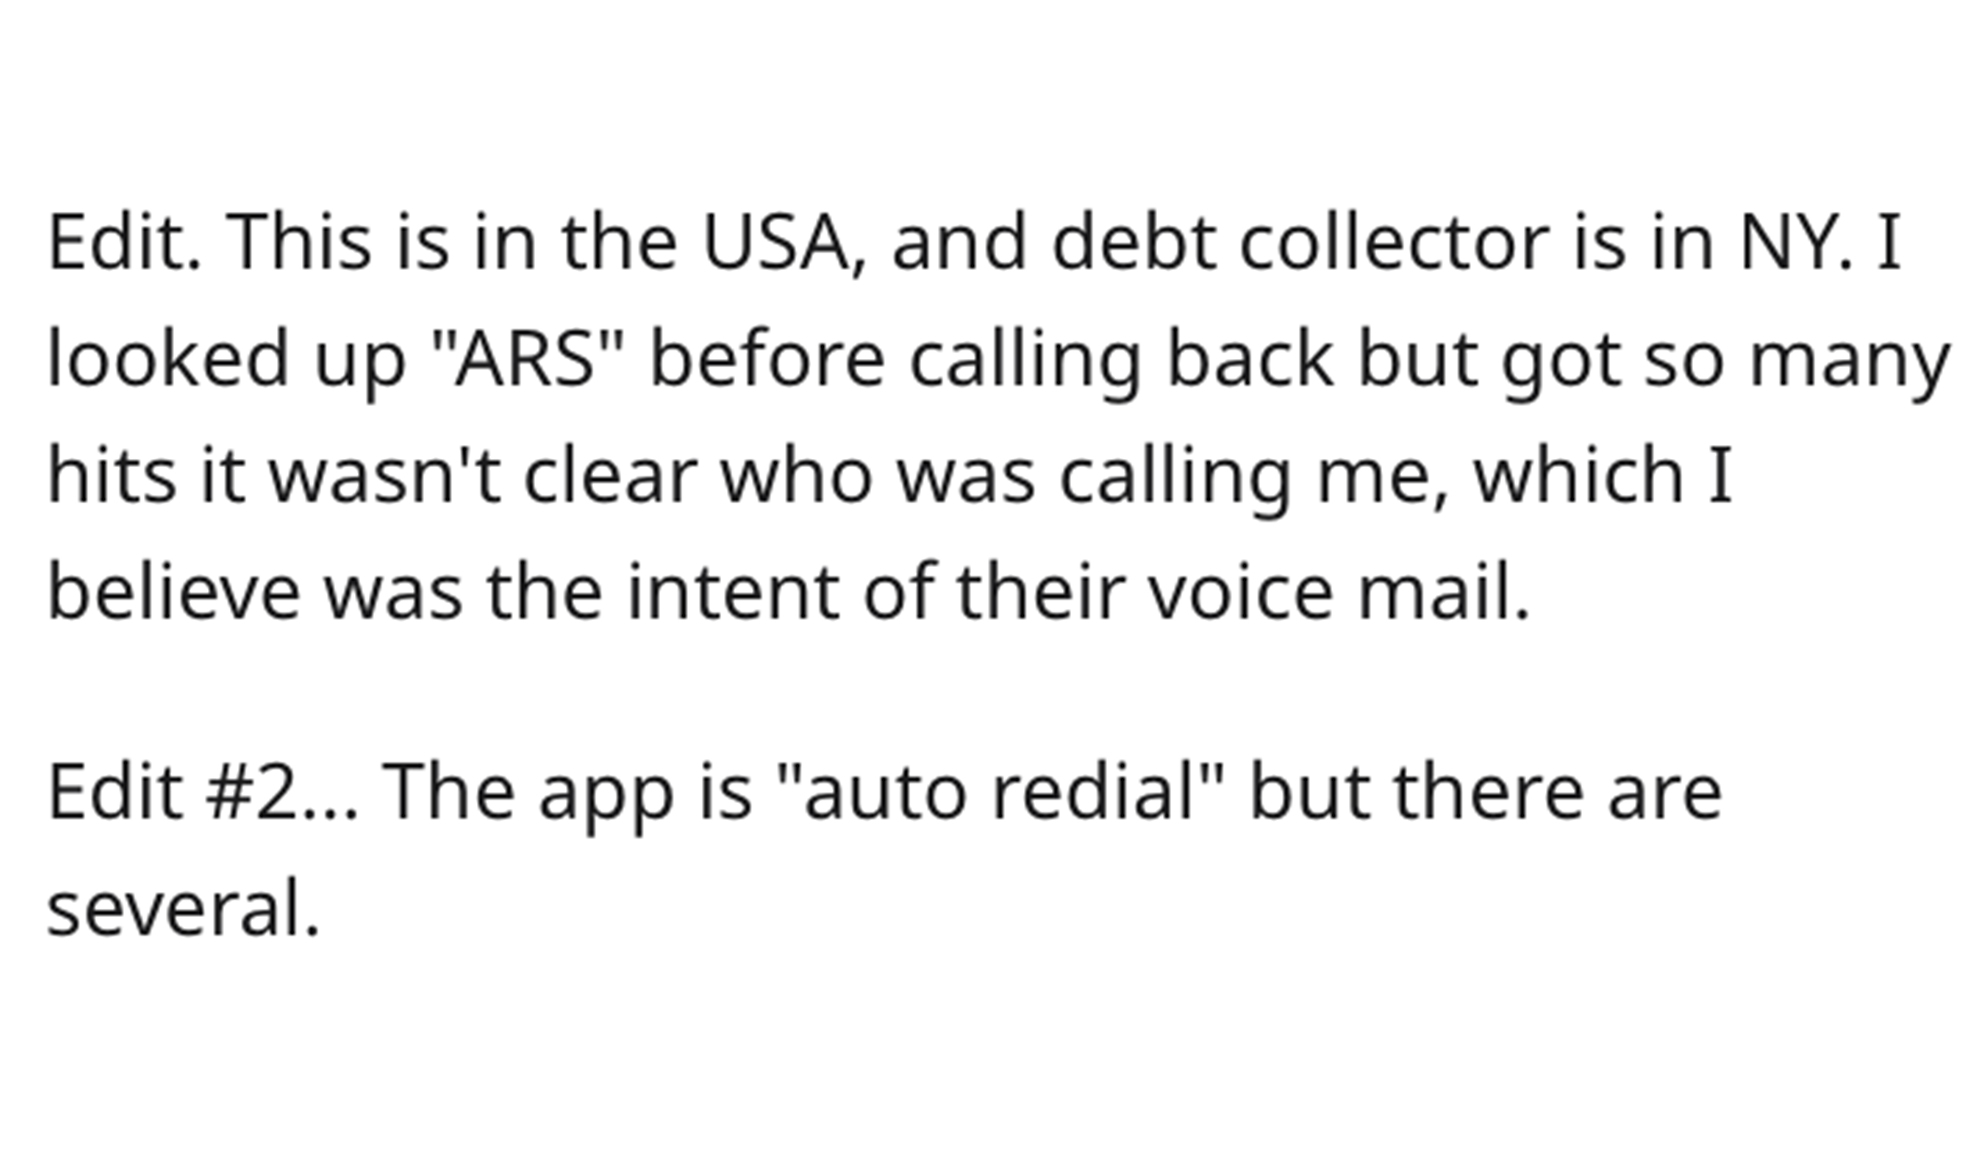 Debt Collector Revenge Story - angle - Edit. This is in the Usa, and debt collector is in Ny. I looked up "Ars" before calling back but got so many hits it wasn't clear who was calling me, which I believe was the intent of their voice mail. Edit ... The a